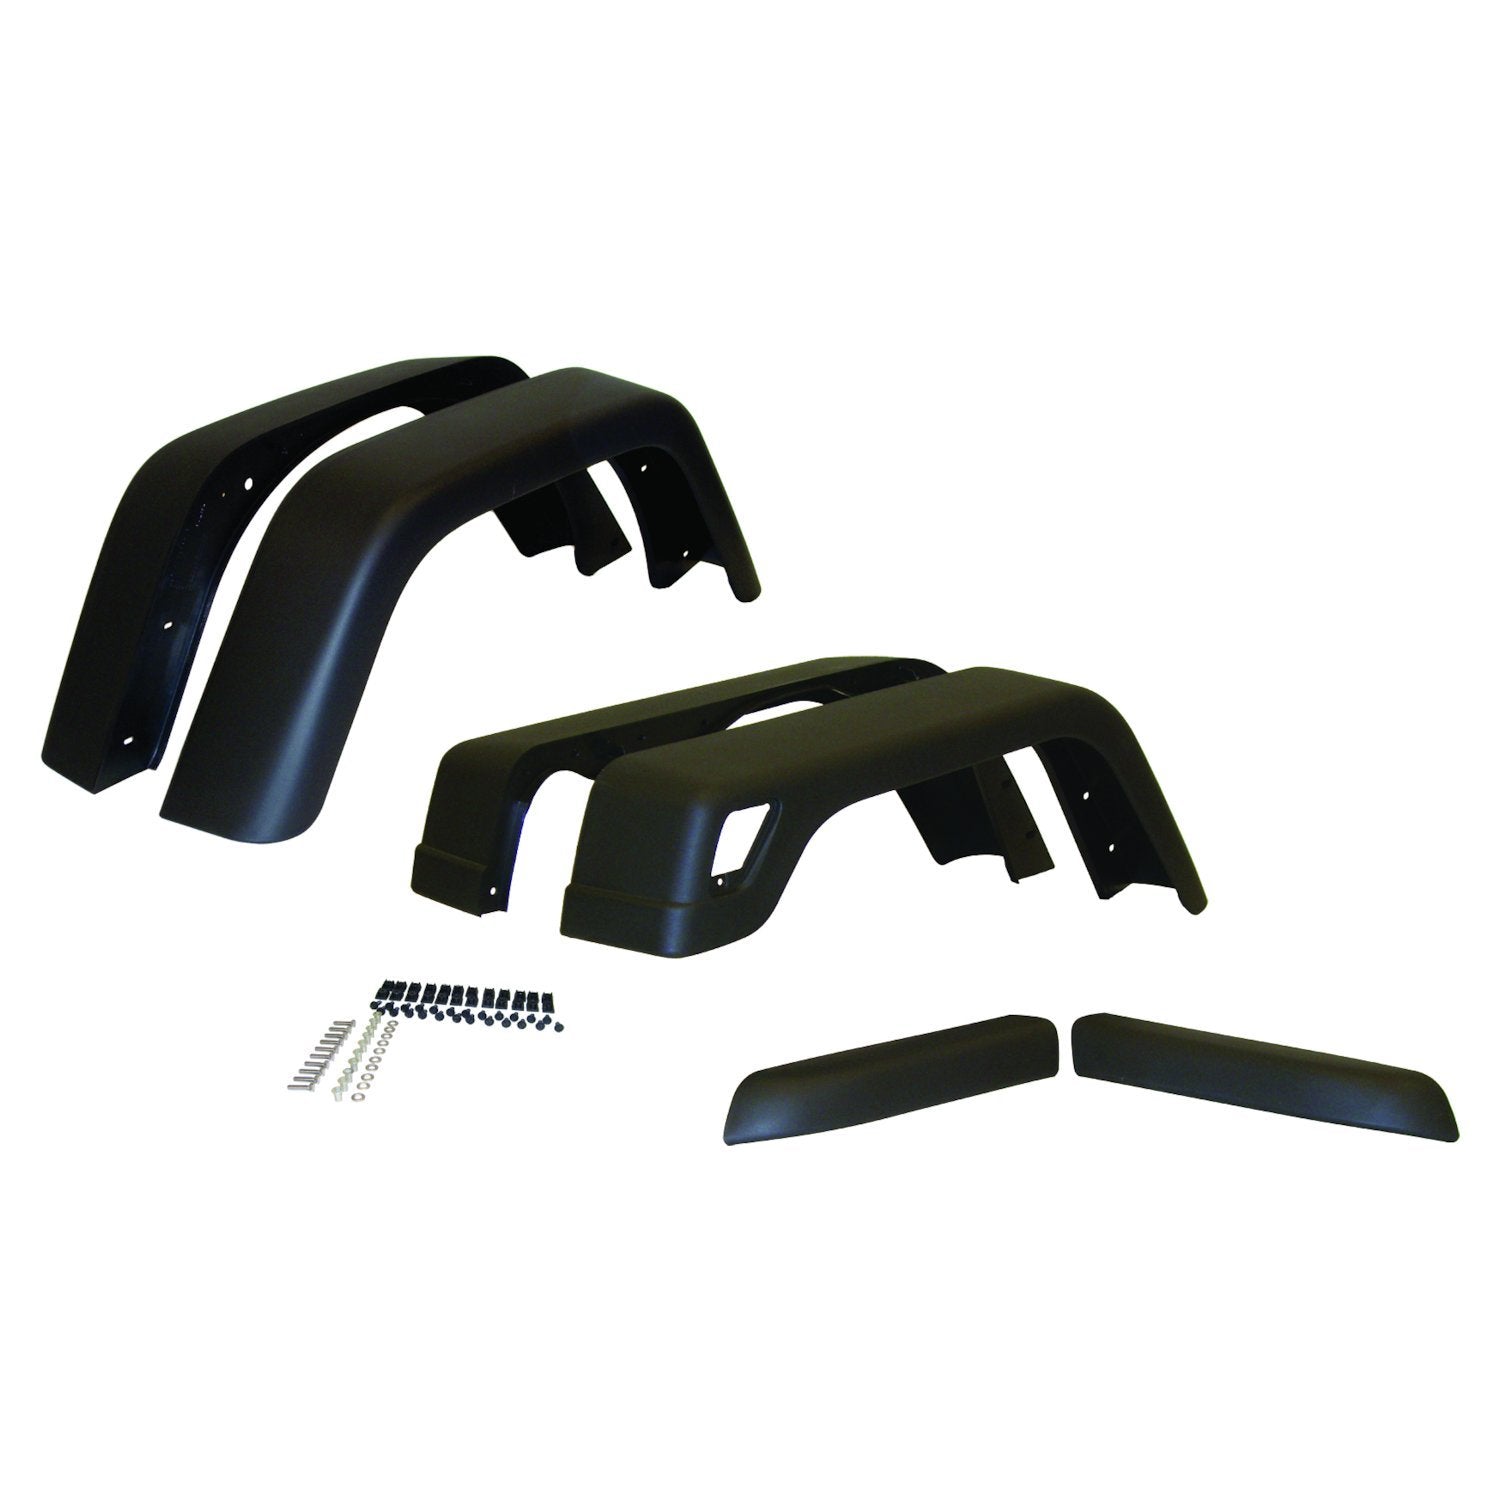 Fender Flare Kit, Wide Style; Includes 4 Fender Flares, 2 Extensions, & Hardware